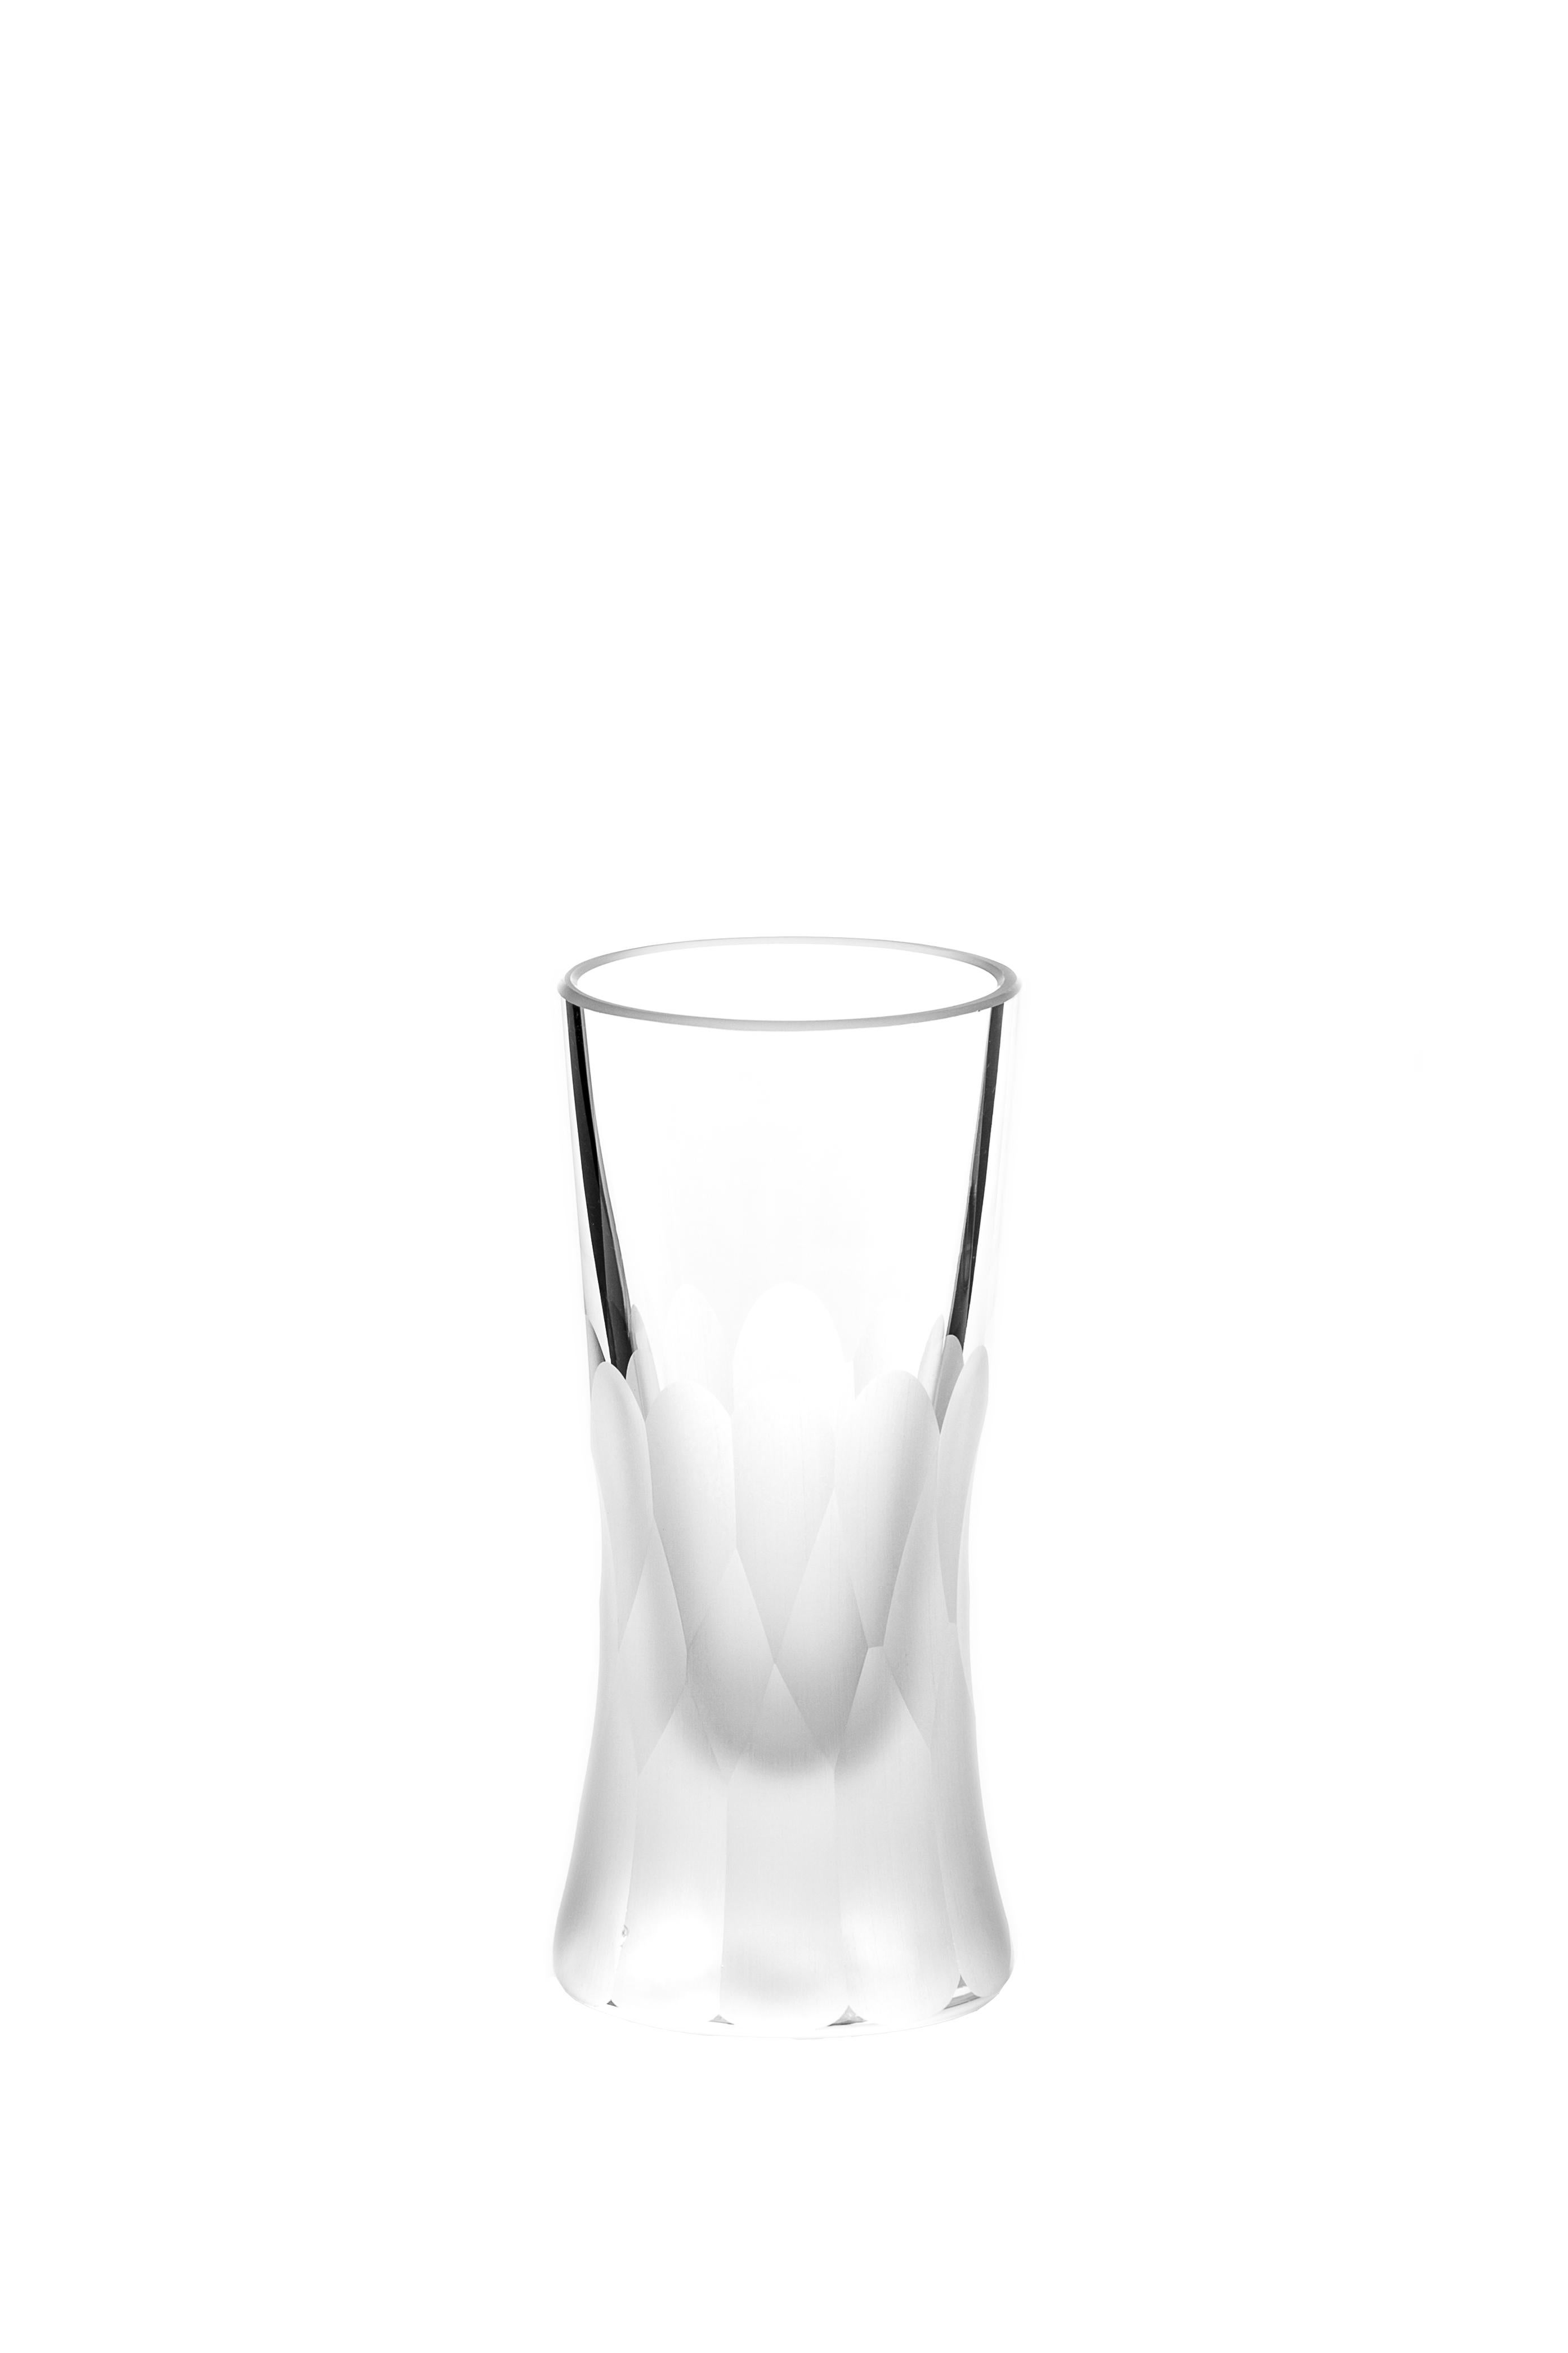 Martino Gamper Handmade Irish Crystal Shot Glass 'Cuttings' Series Set of 4 In New Condition For Sale In Ballyduff, IE